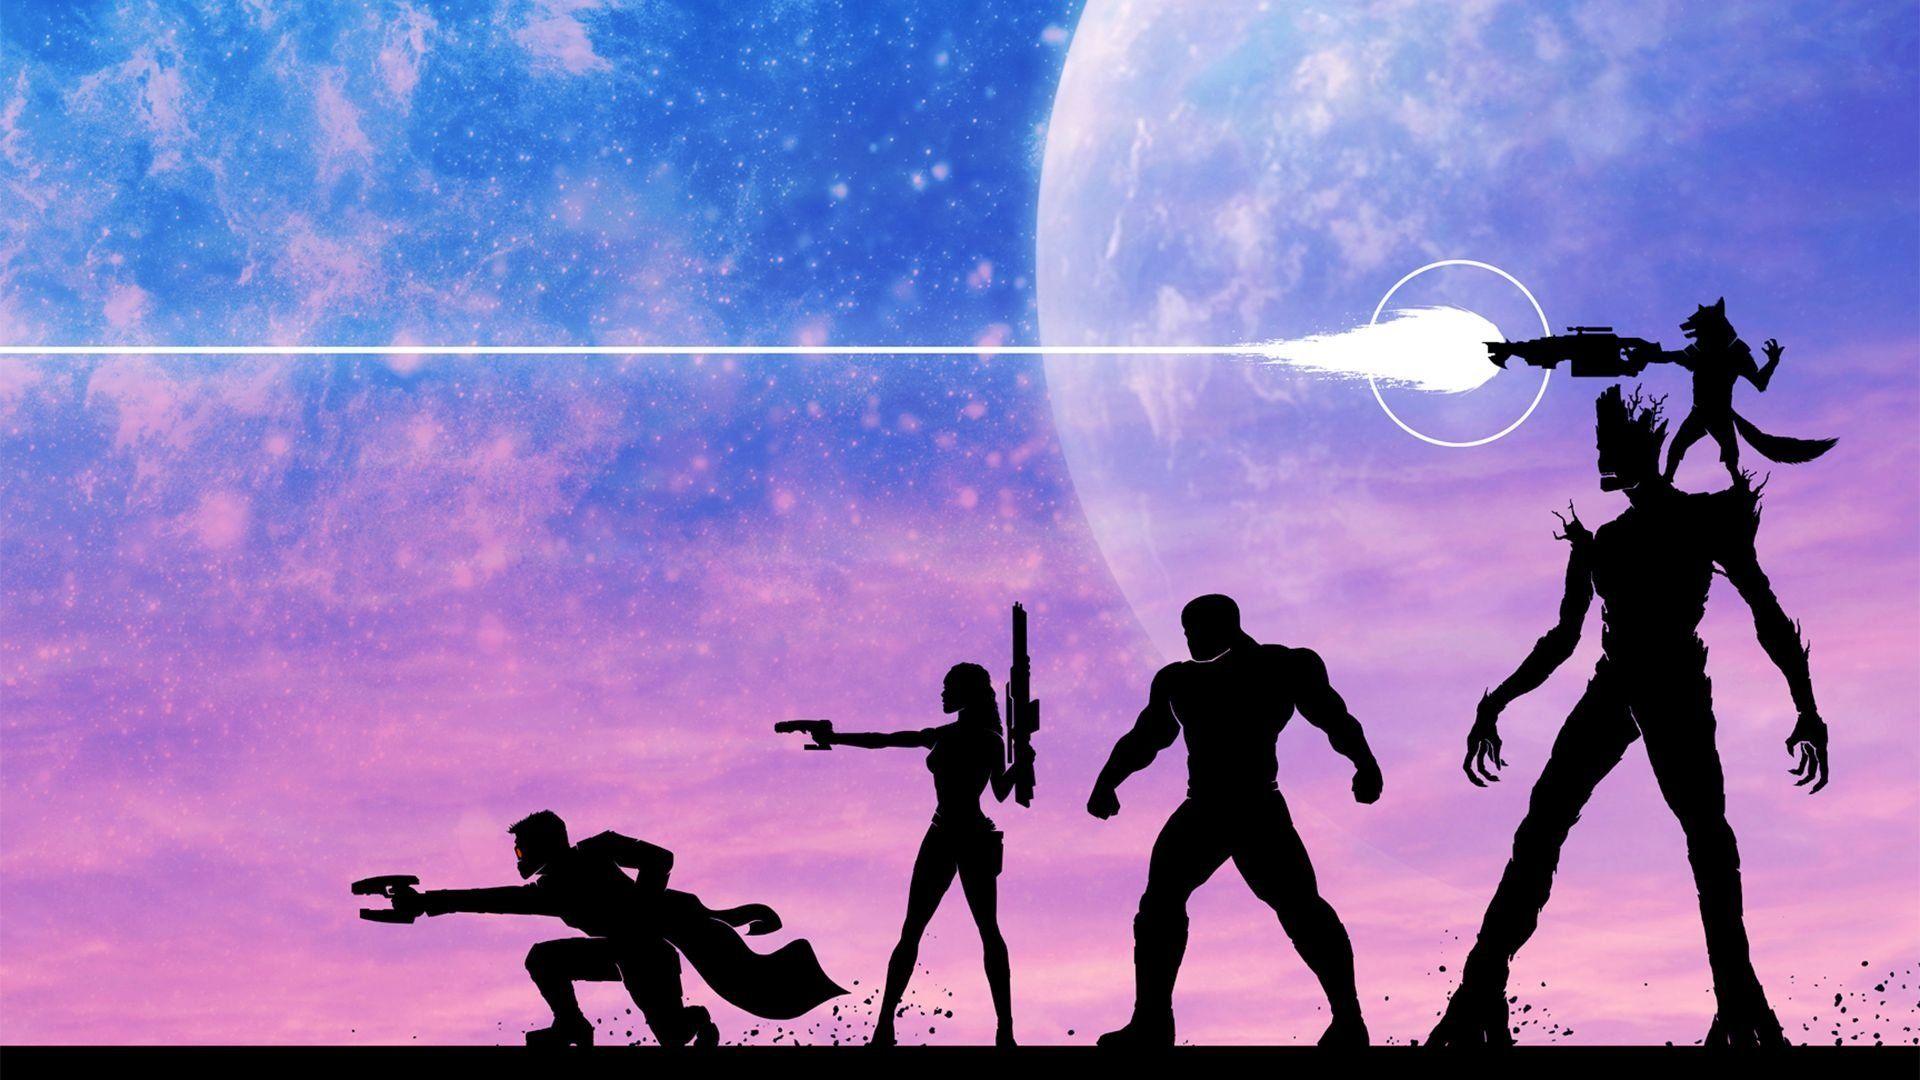 Guardians Of The Galaxy HD Wallpaper. Background